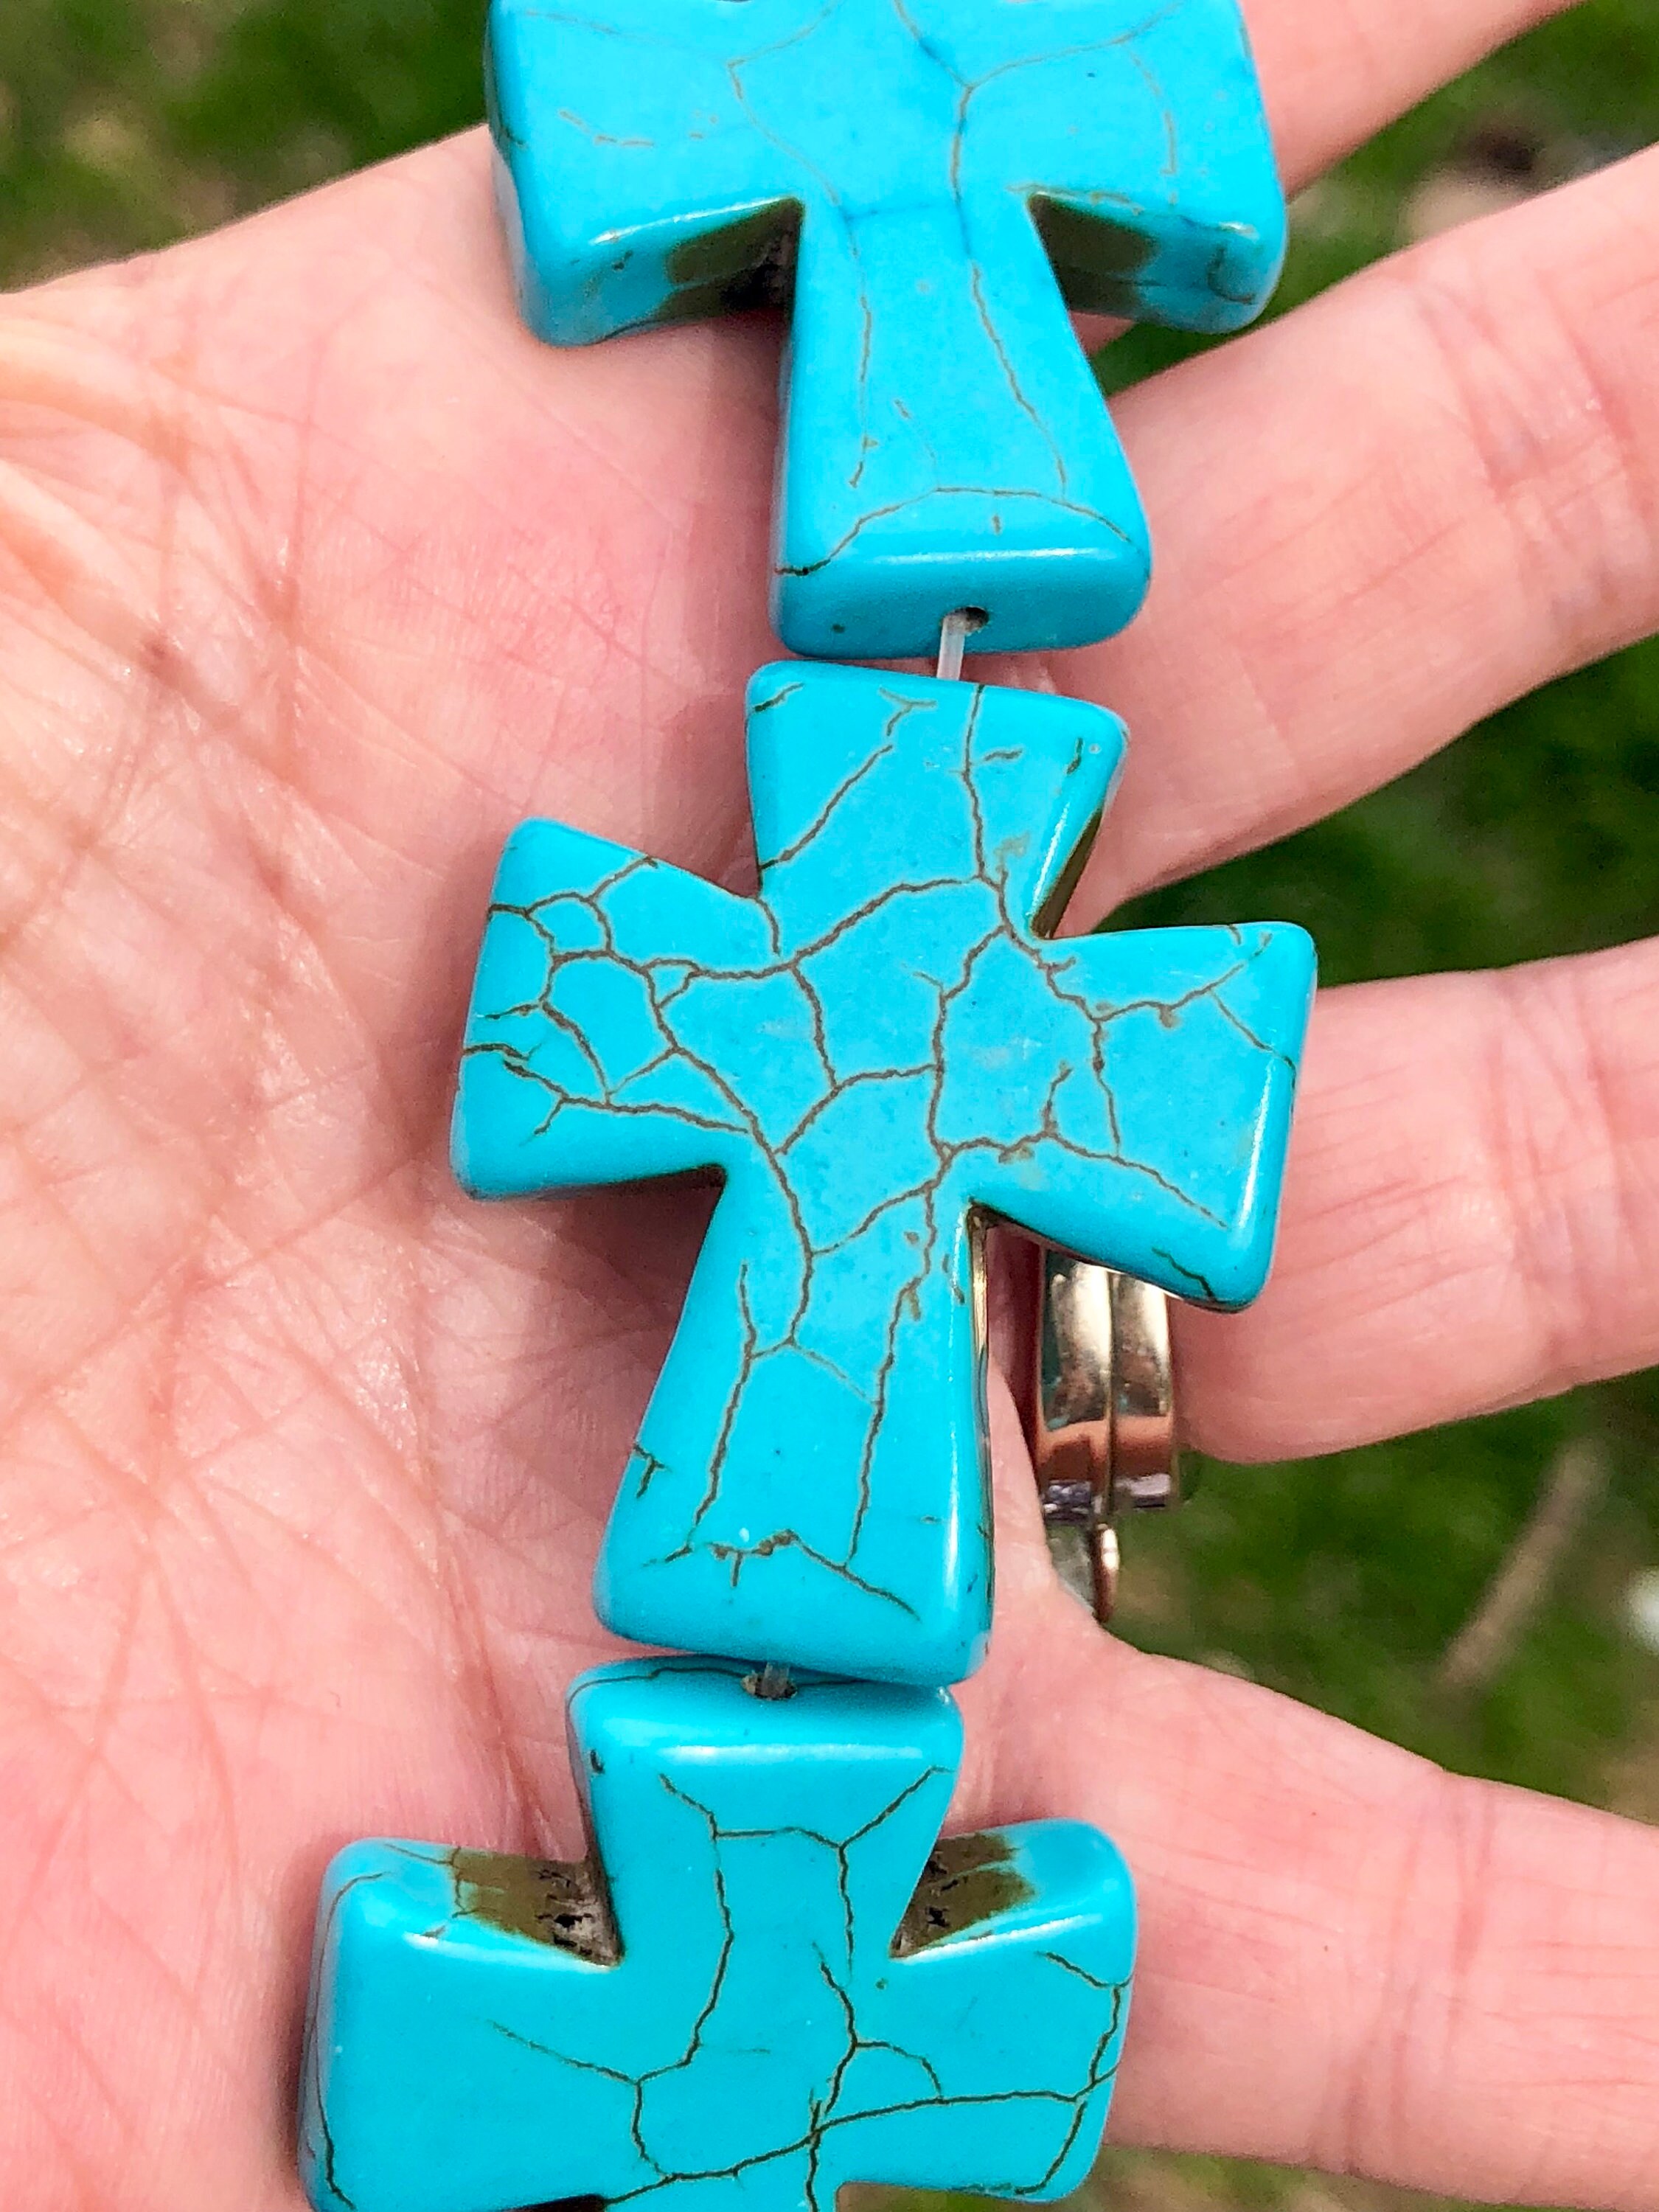 Large Turquoise Beige Cross Beads, Focal Beads, Necklace Beads, Bracelet  Beads, Jewelry Making Beads, 35mm Long, 2 Beads per Pack 